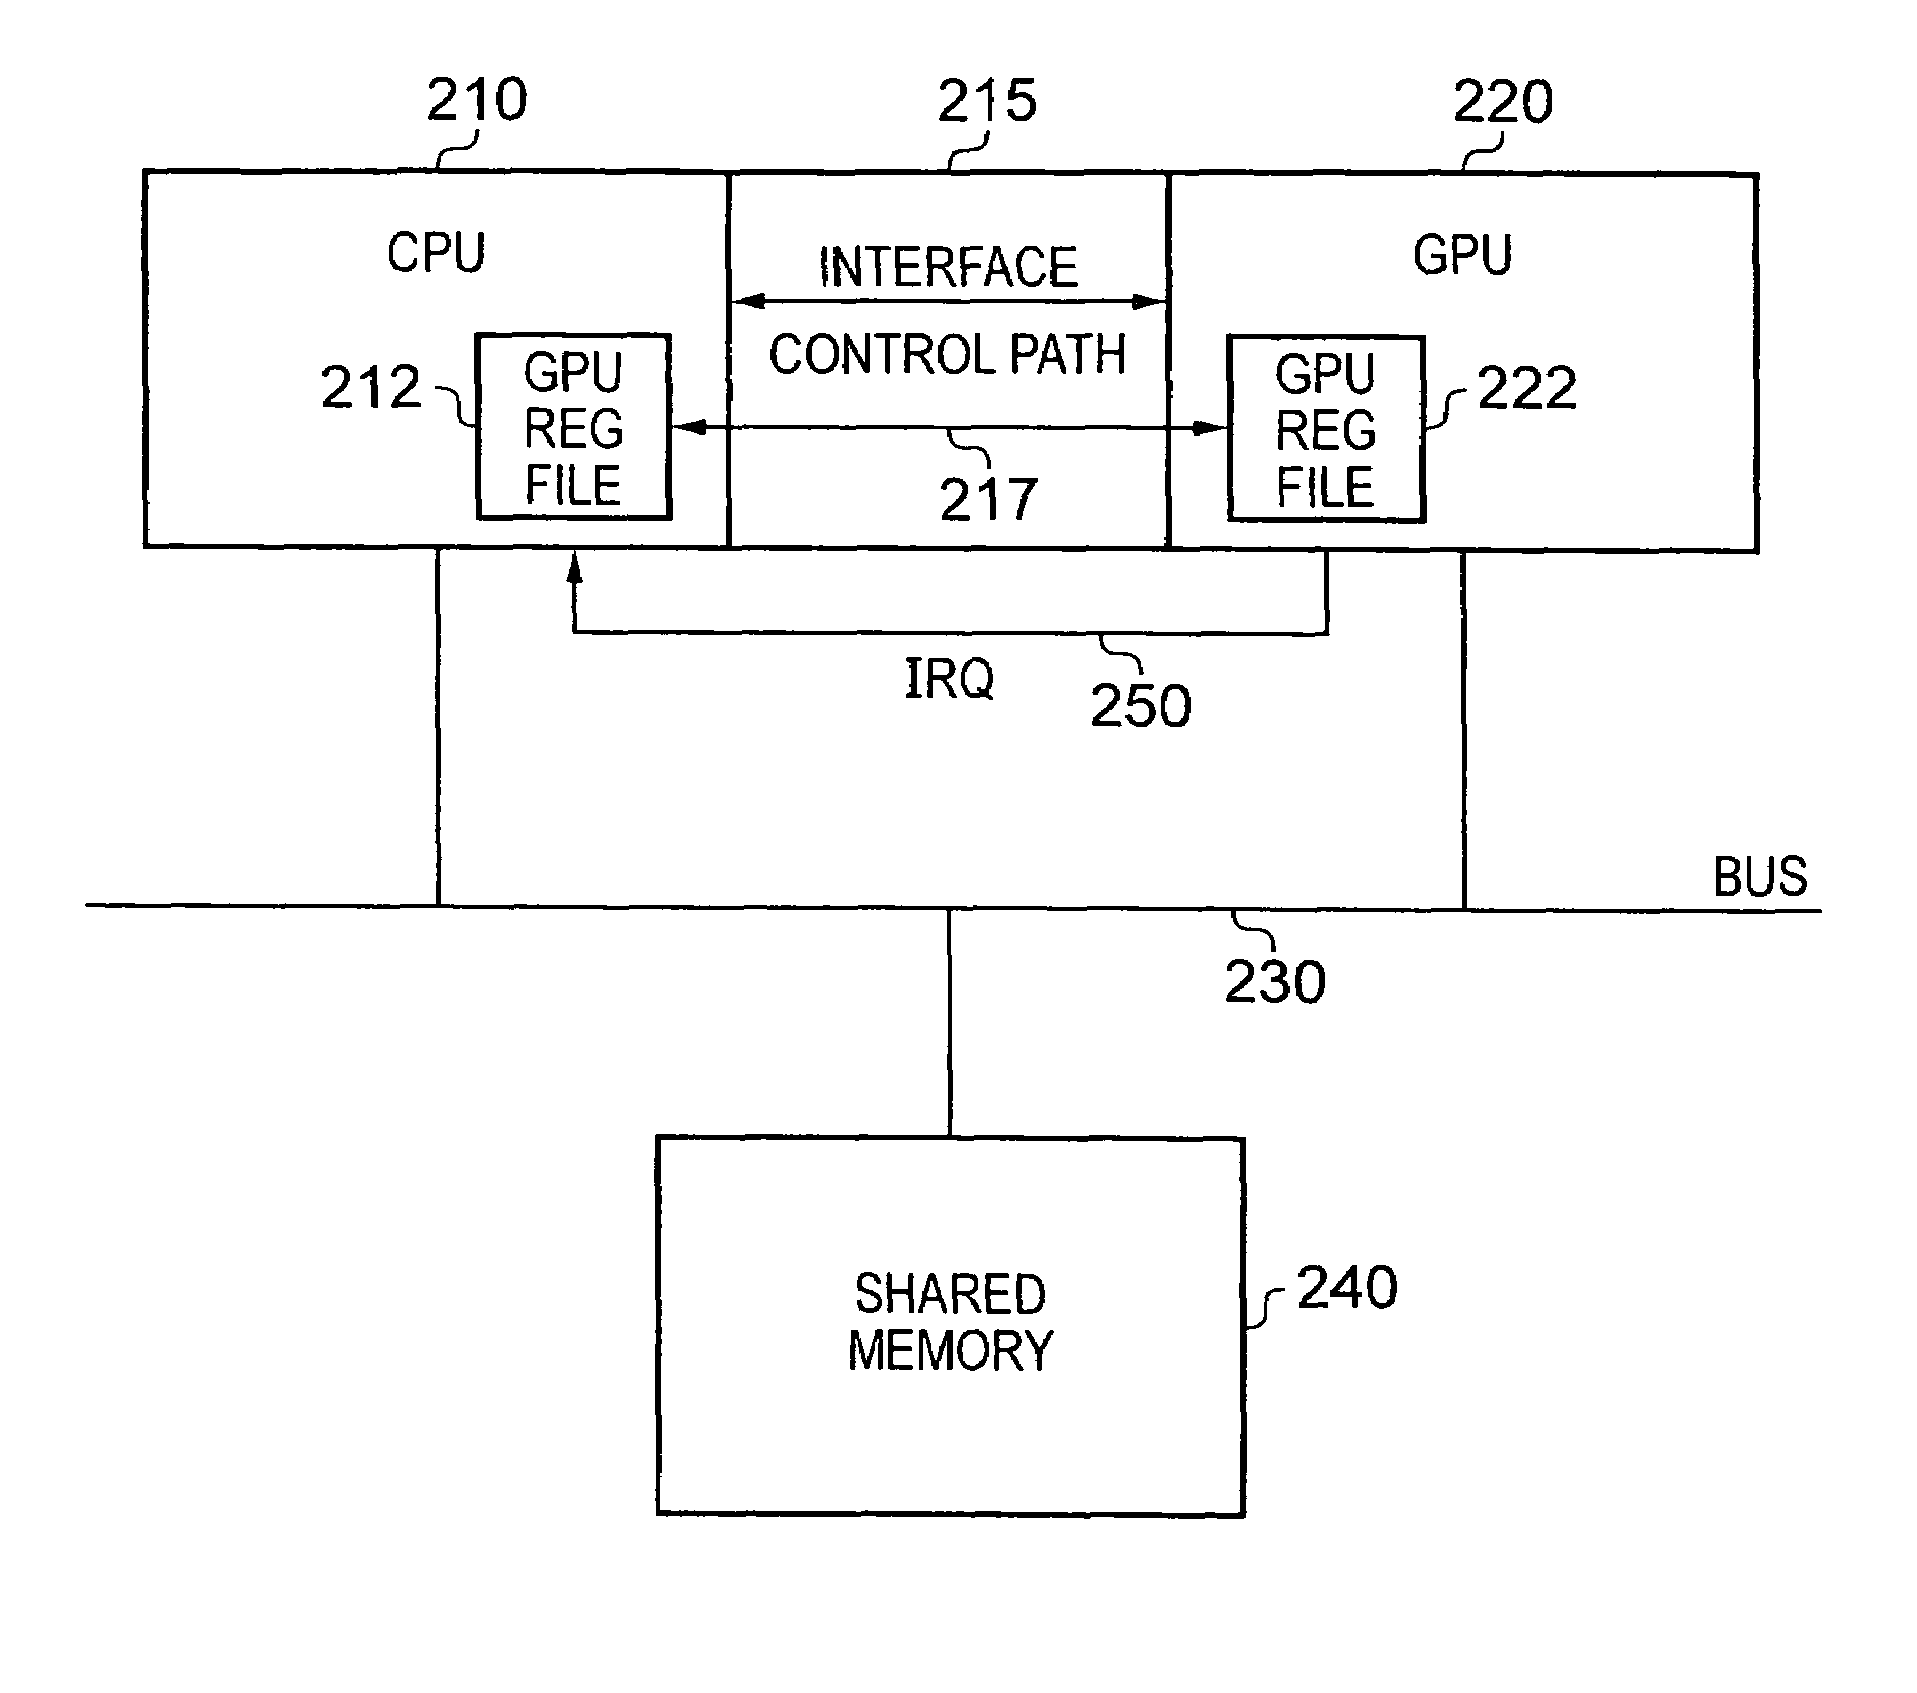 Apparatus and method for communicating between a central processing unit and a graphics processing unit